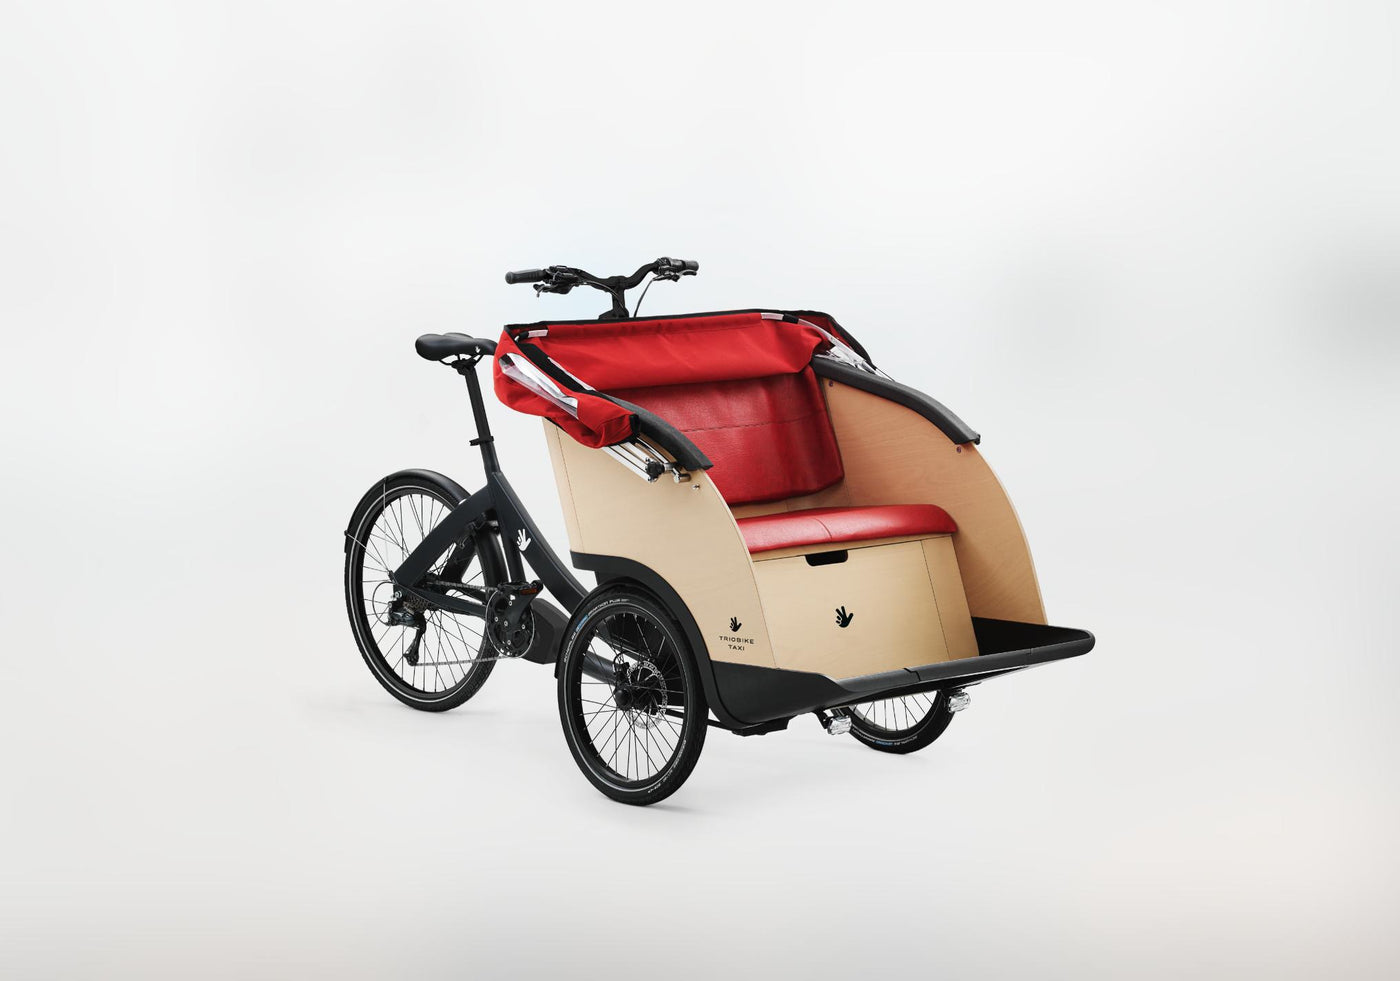 Triobike Taxi Brose Enviolo Belt Drive  "Cycling Without Age"